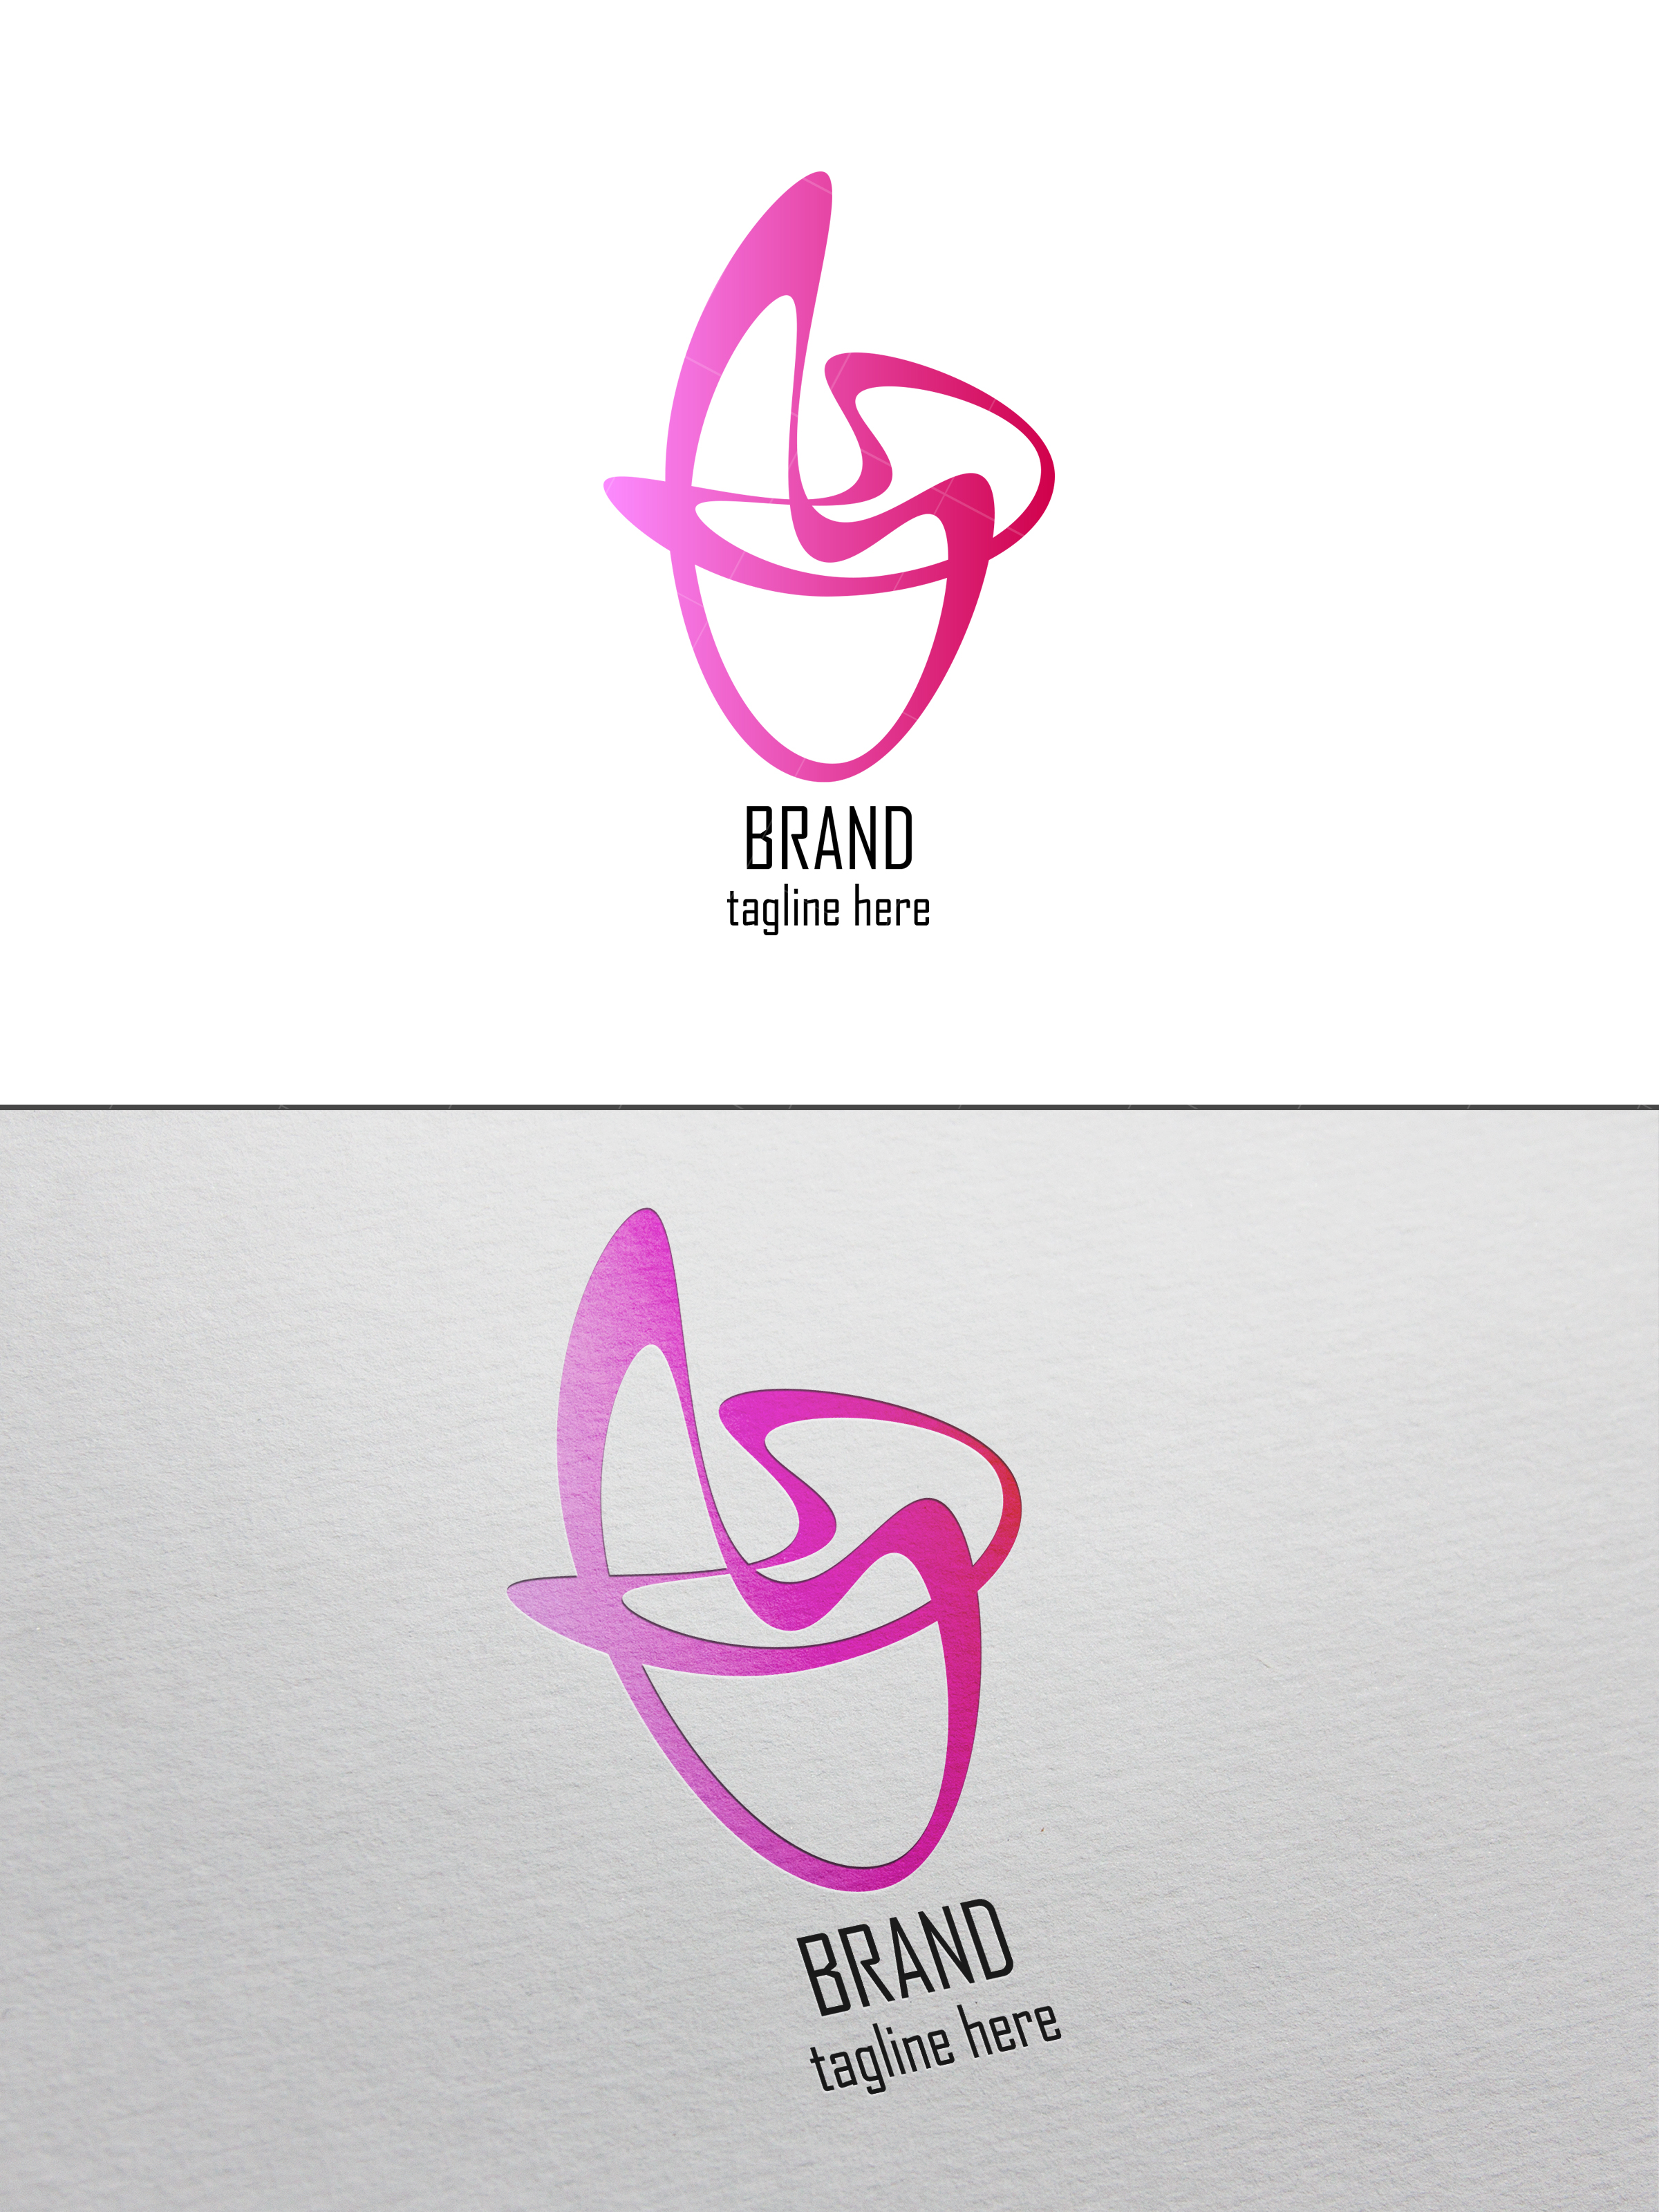 Architecture, Art Industrial Logo Template